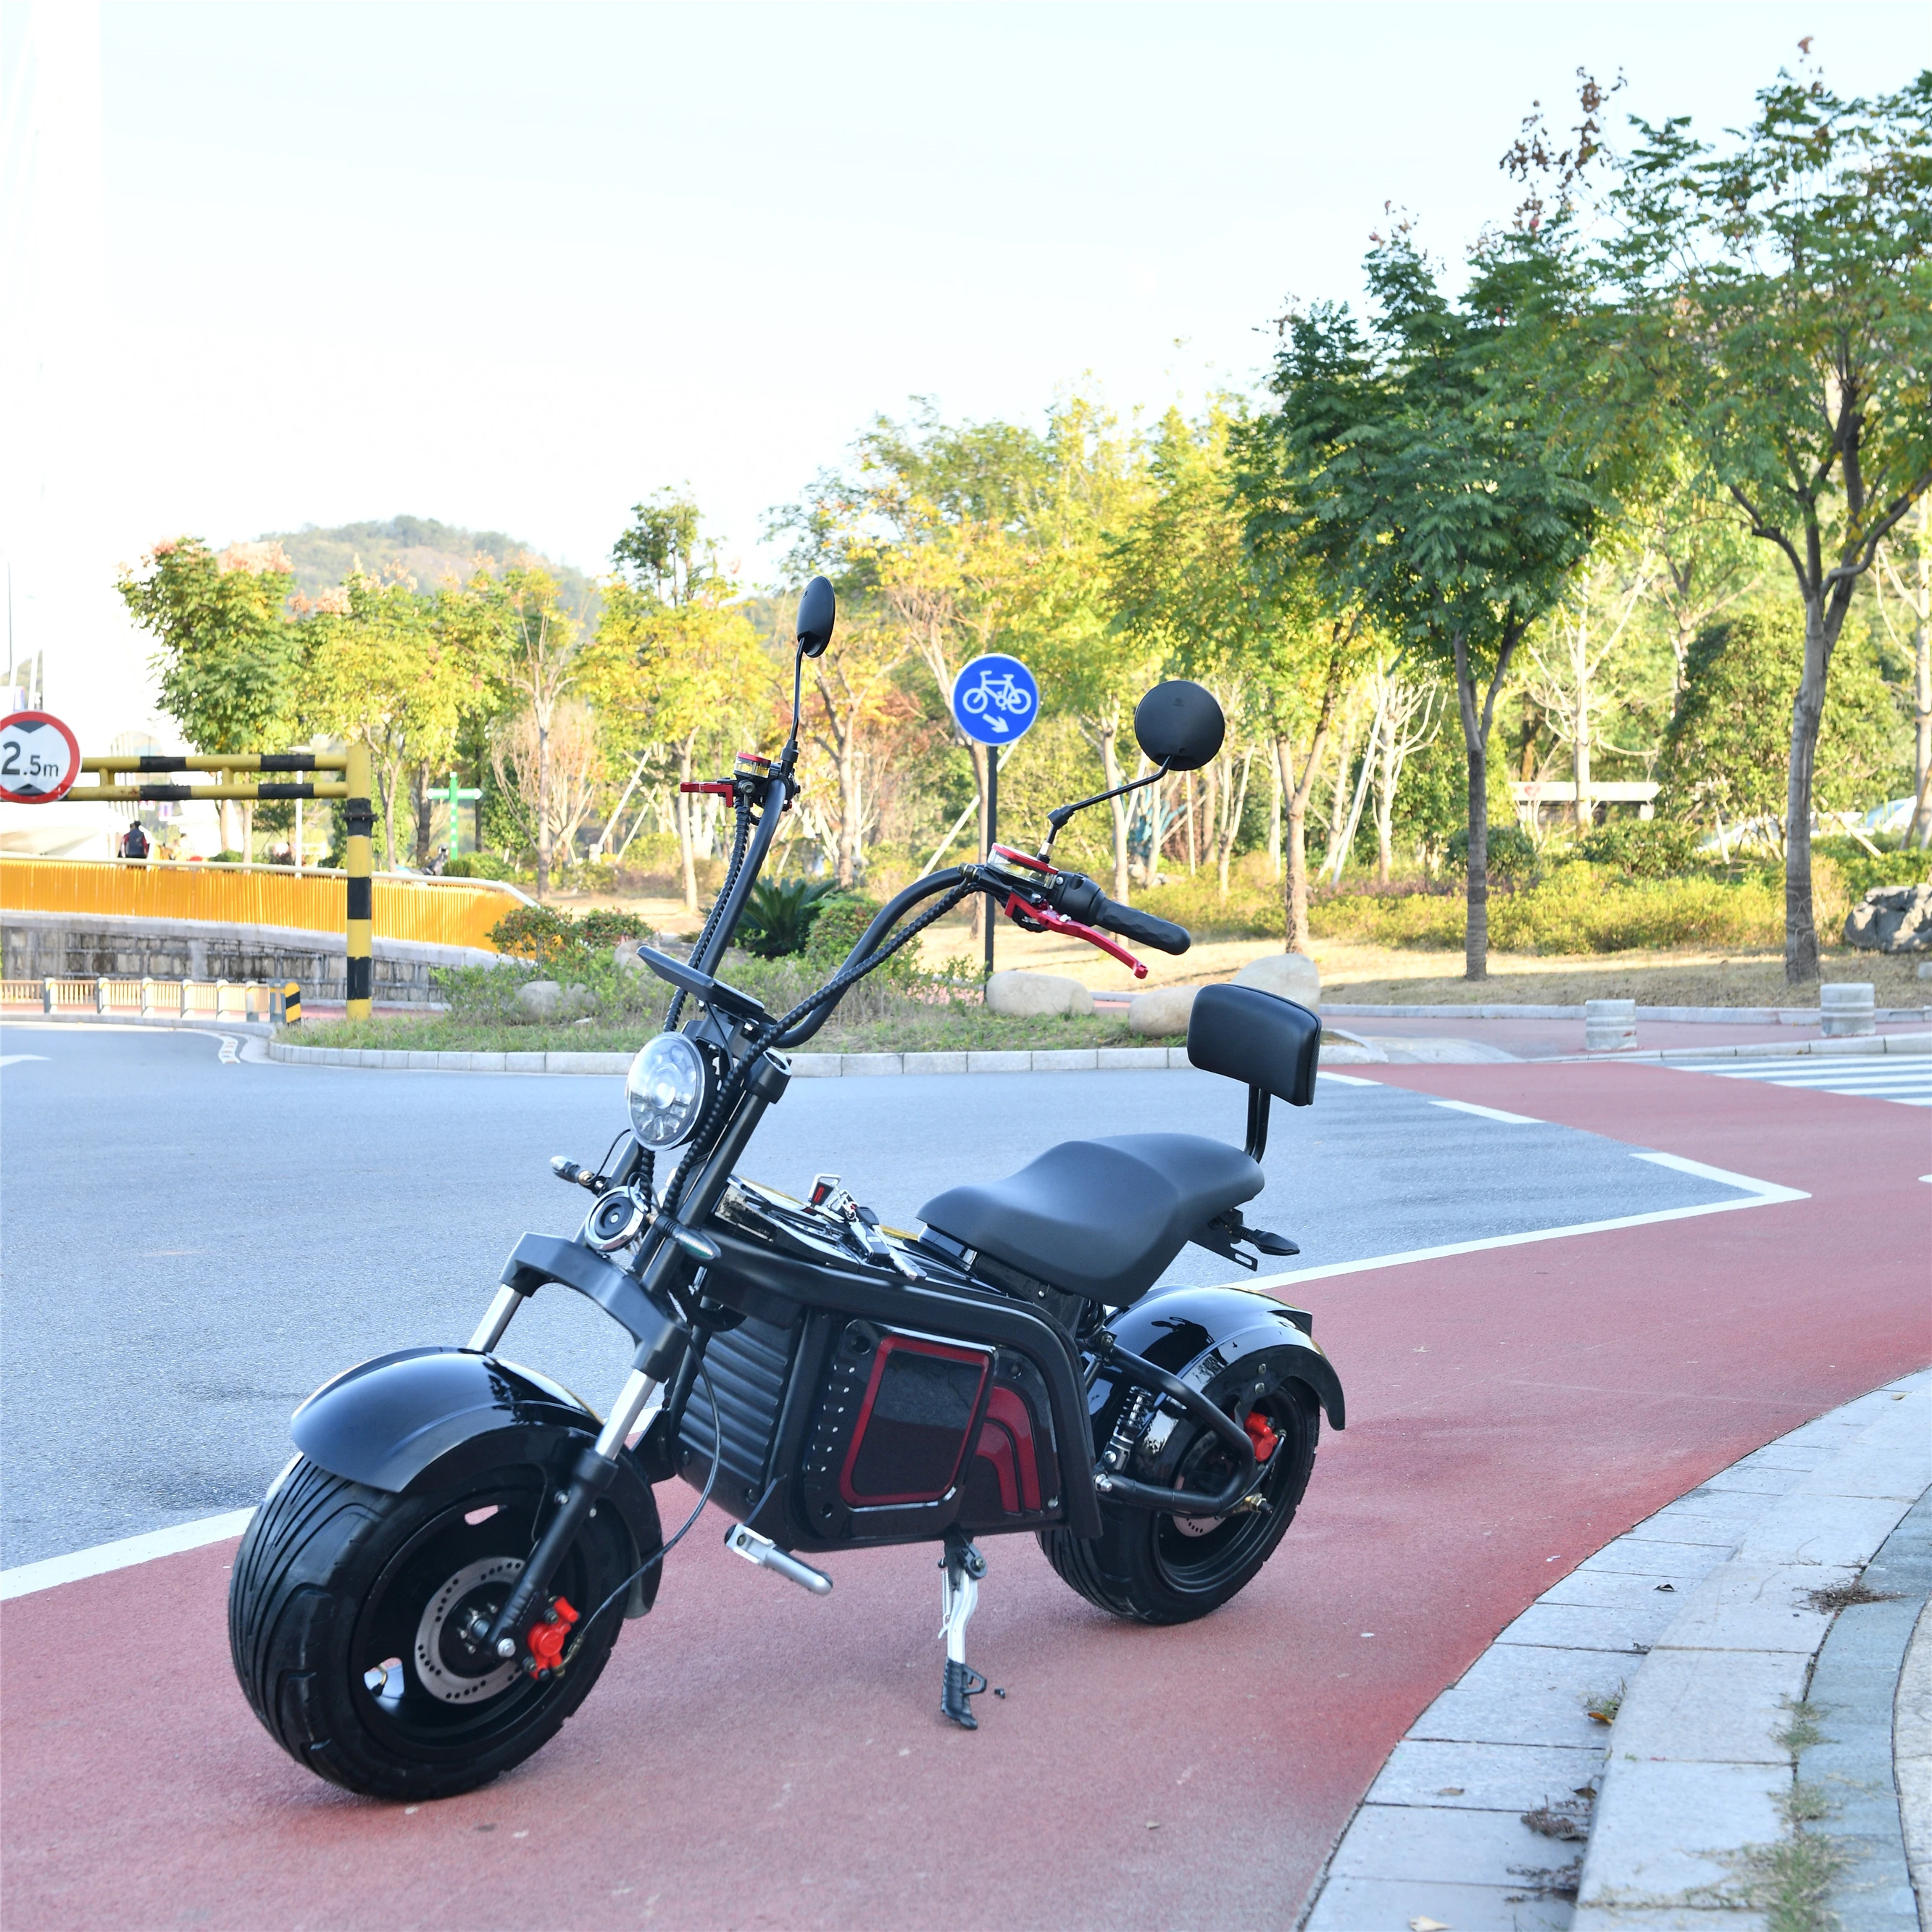 

2022 New Model 3000W EEC Electric Scooter Electric Motorcycle Citycoco Scooter COC Approved